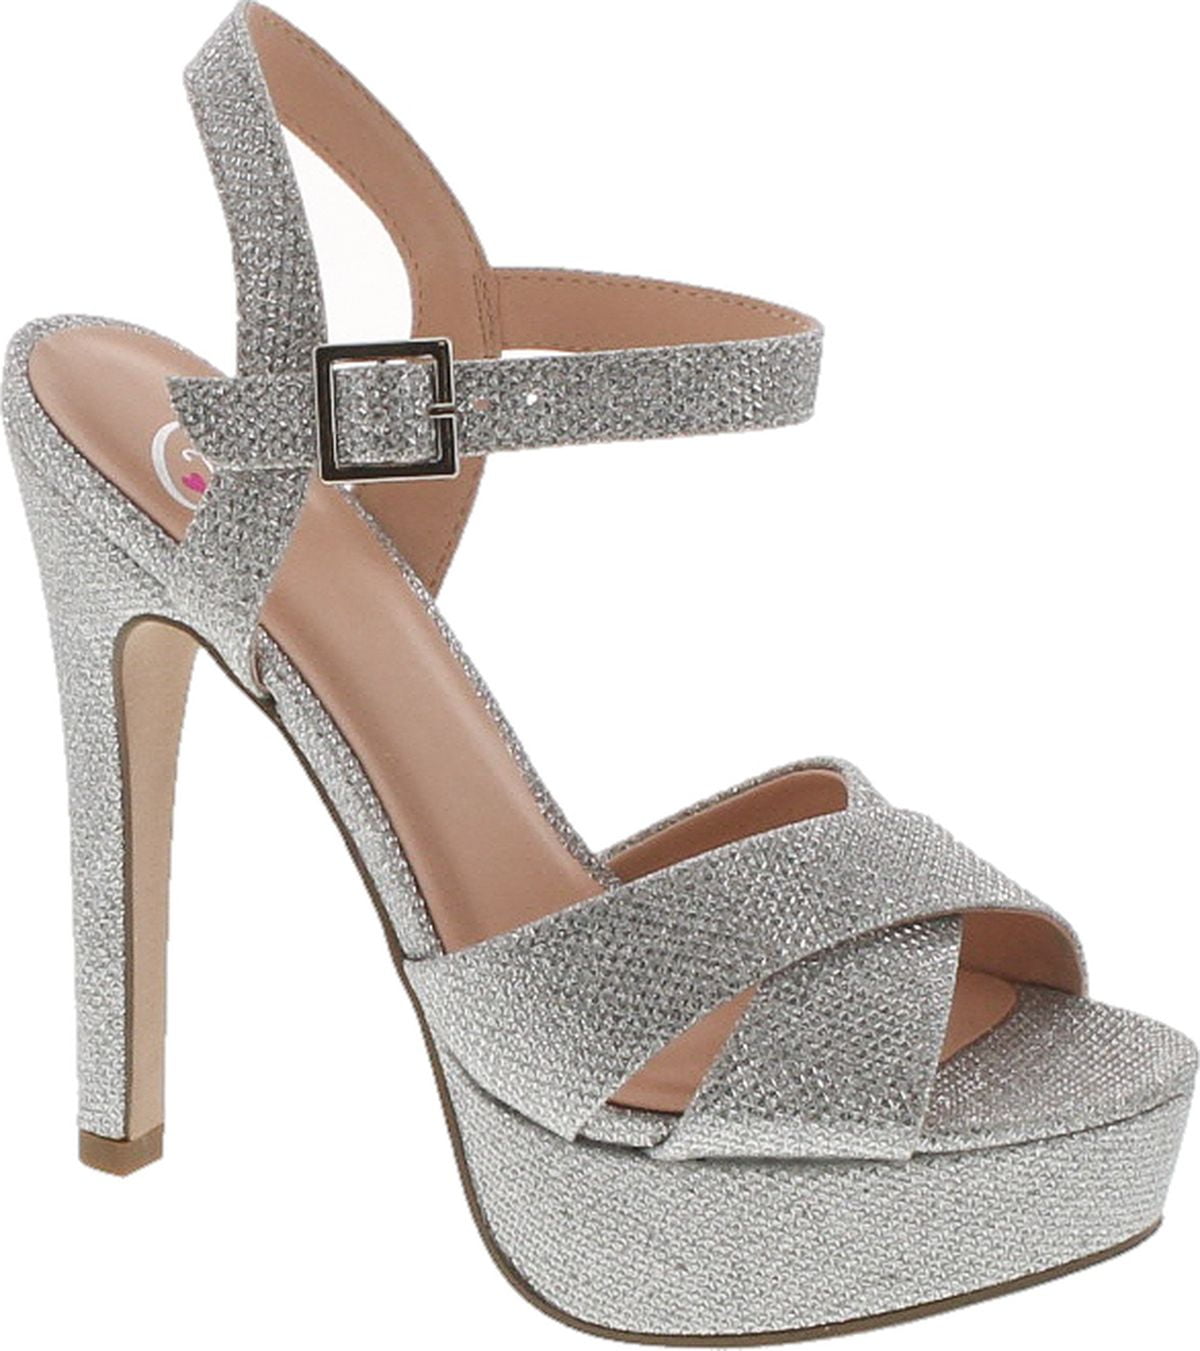 My Delicious Shoes - Delicious Womens Metallic High Heel Dressy Party ...